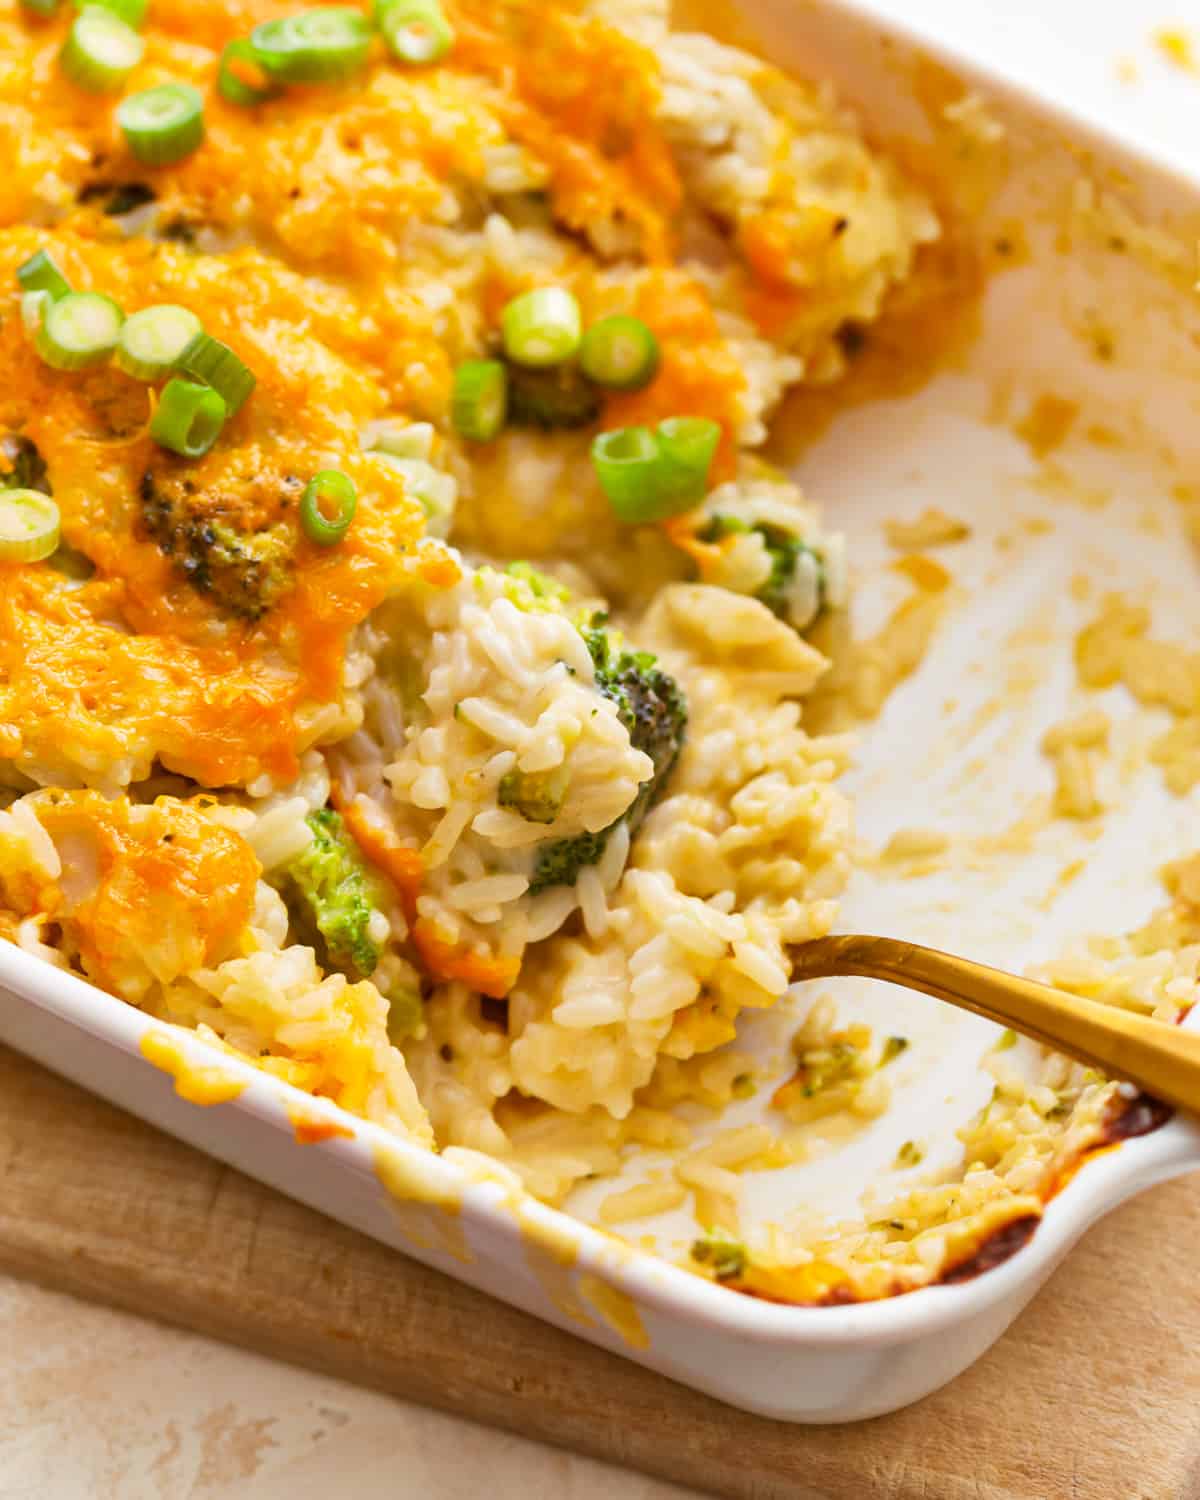 A serving spoon scooping into broccoli cheese rice casserole.